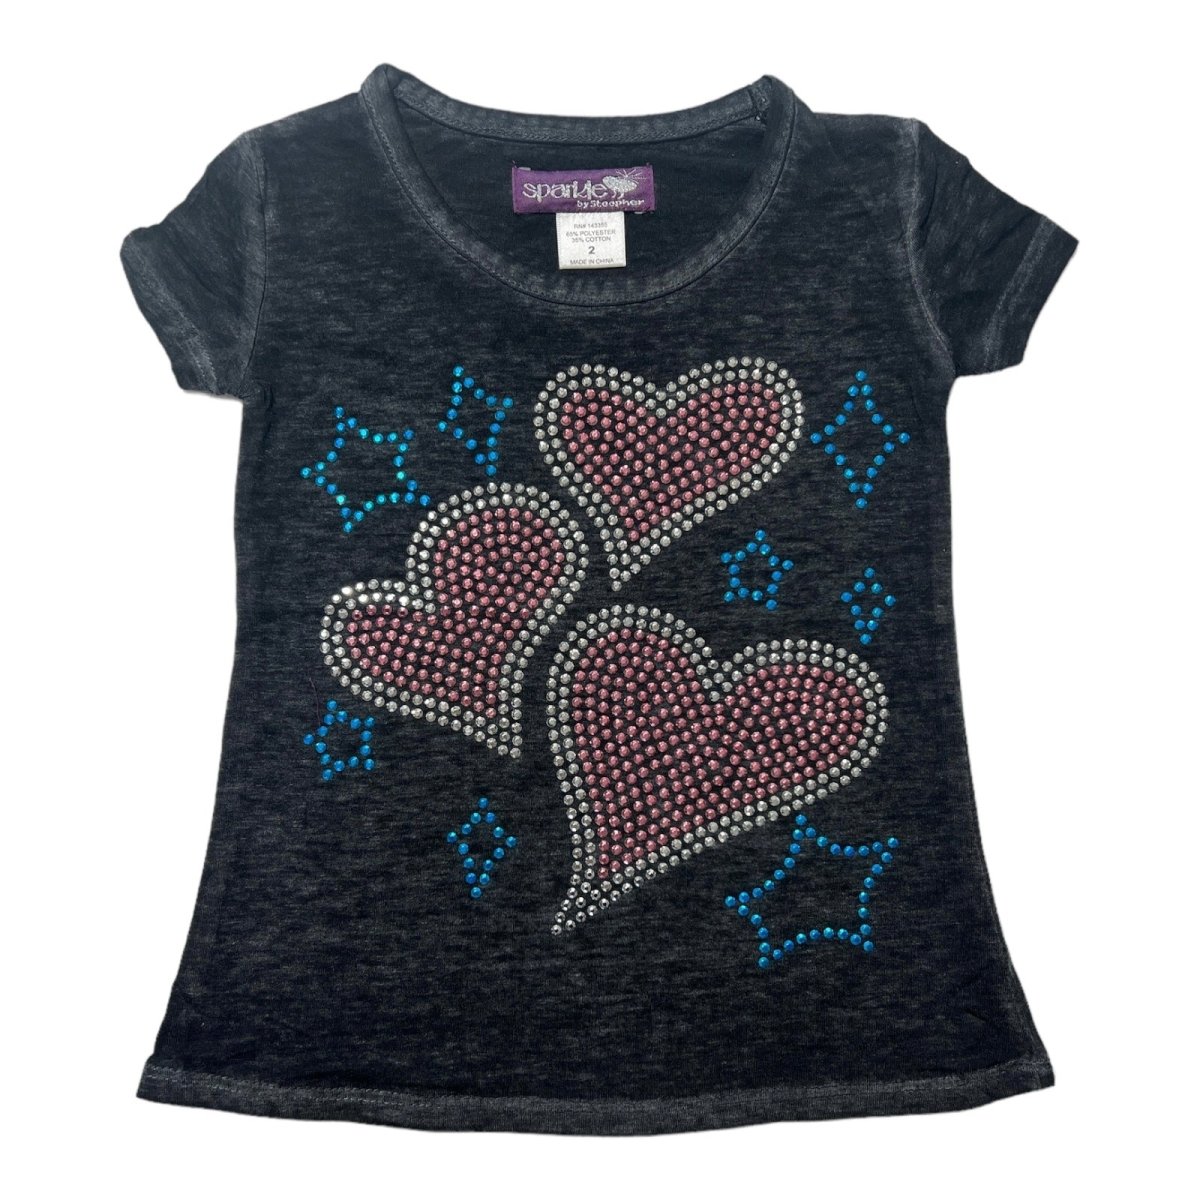 HEARTS AND STARS TSHIRT - SPARKLE BY STOOPHER